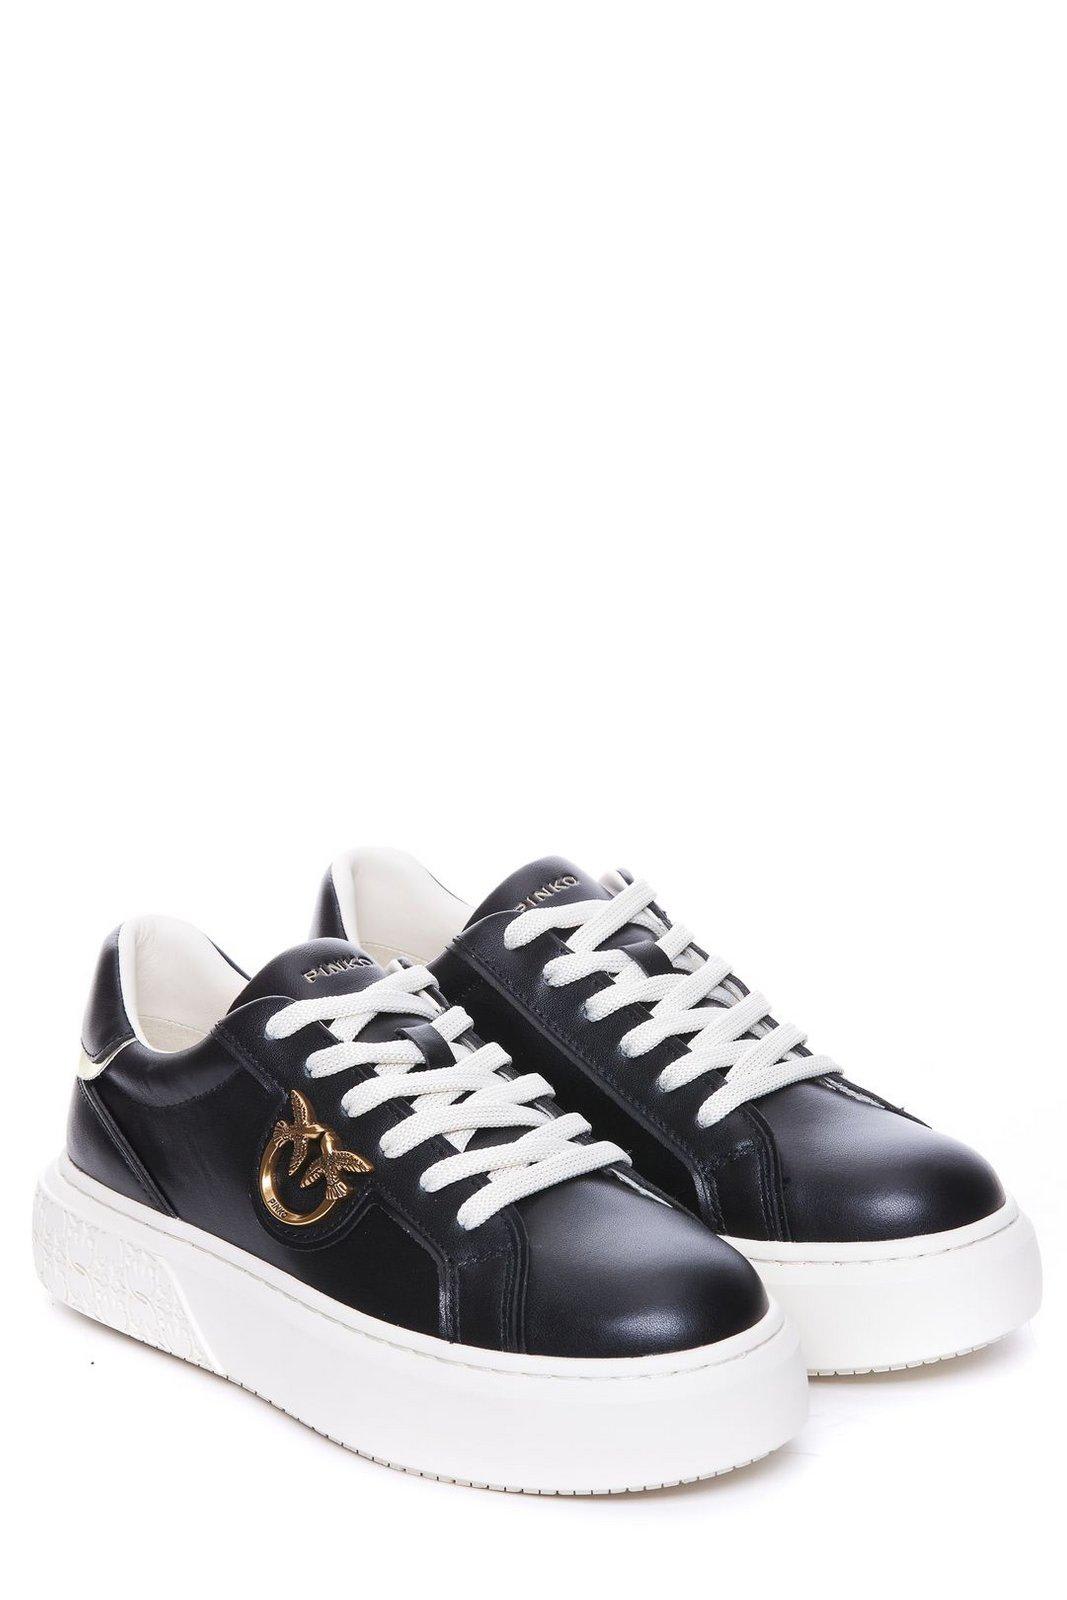 Shop Pinko Round-toe Lace-up Sneakers